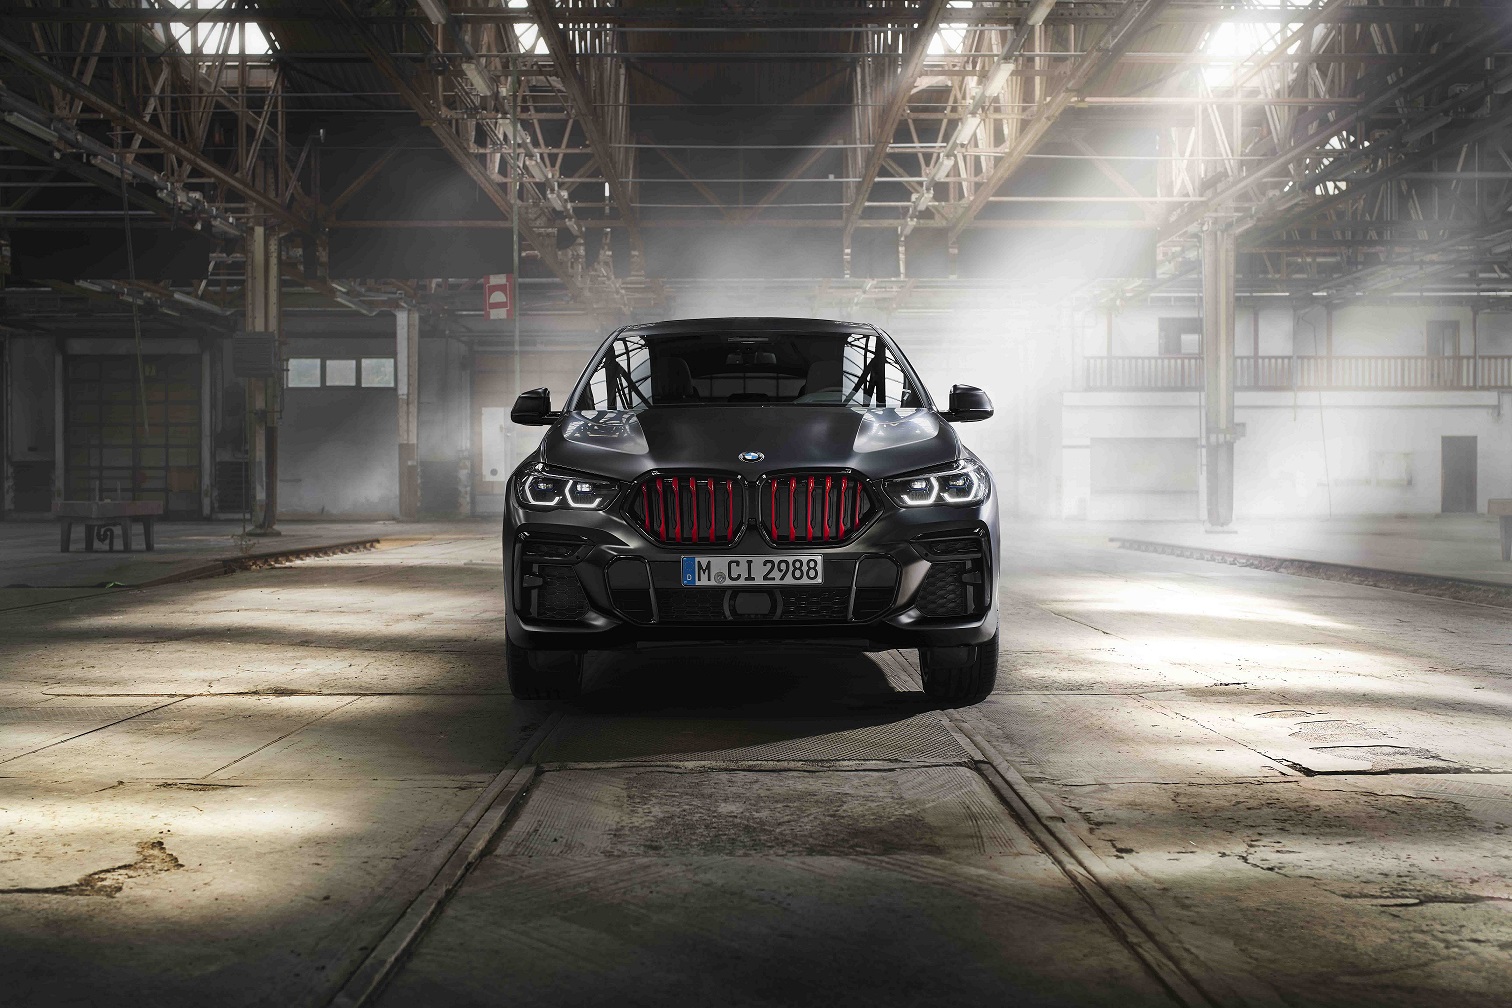 BMW X5 Black Vermilion Edition: inspired by nature